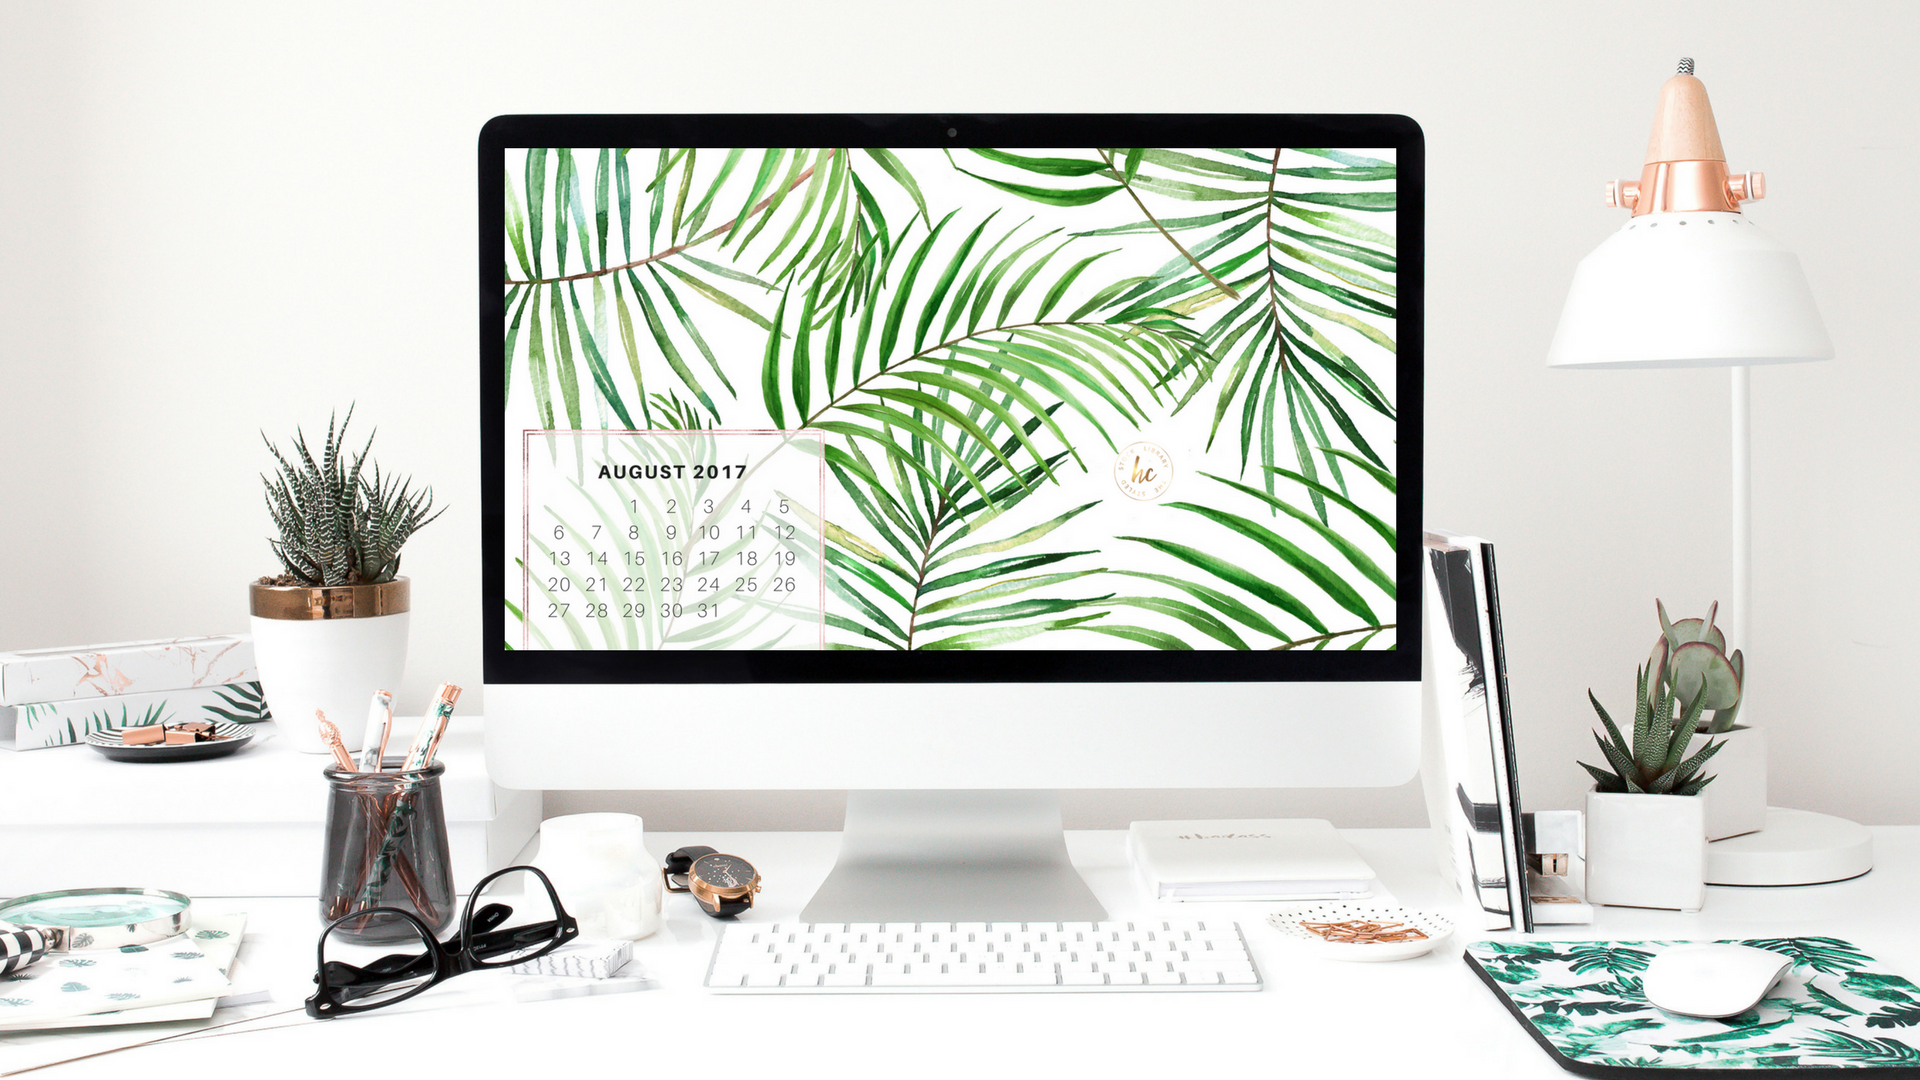  Need a wallpaper for your desktop or laptop? Stay on track with a stylish monthly wallpaper graphic. We designed this in Canva, using a background from our Tropical Graphic Pack.  *Please note that you cannot create products, like wallpapers, that u